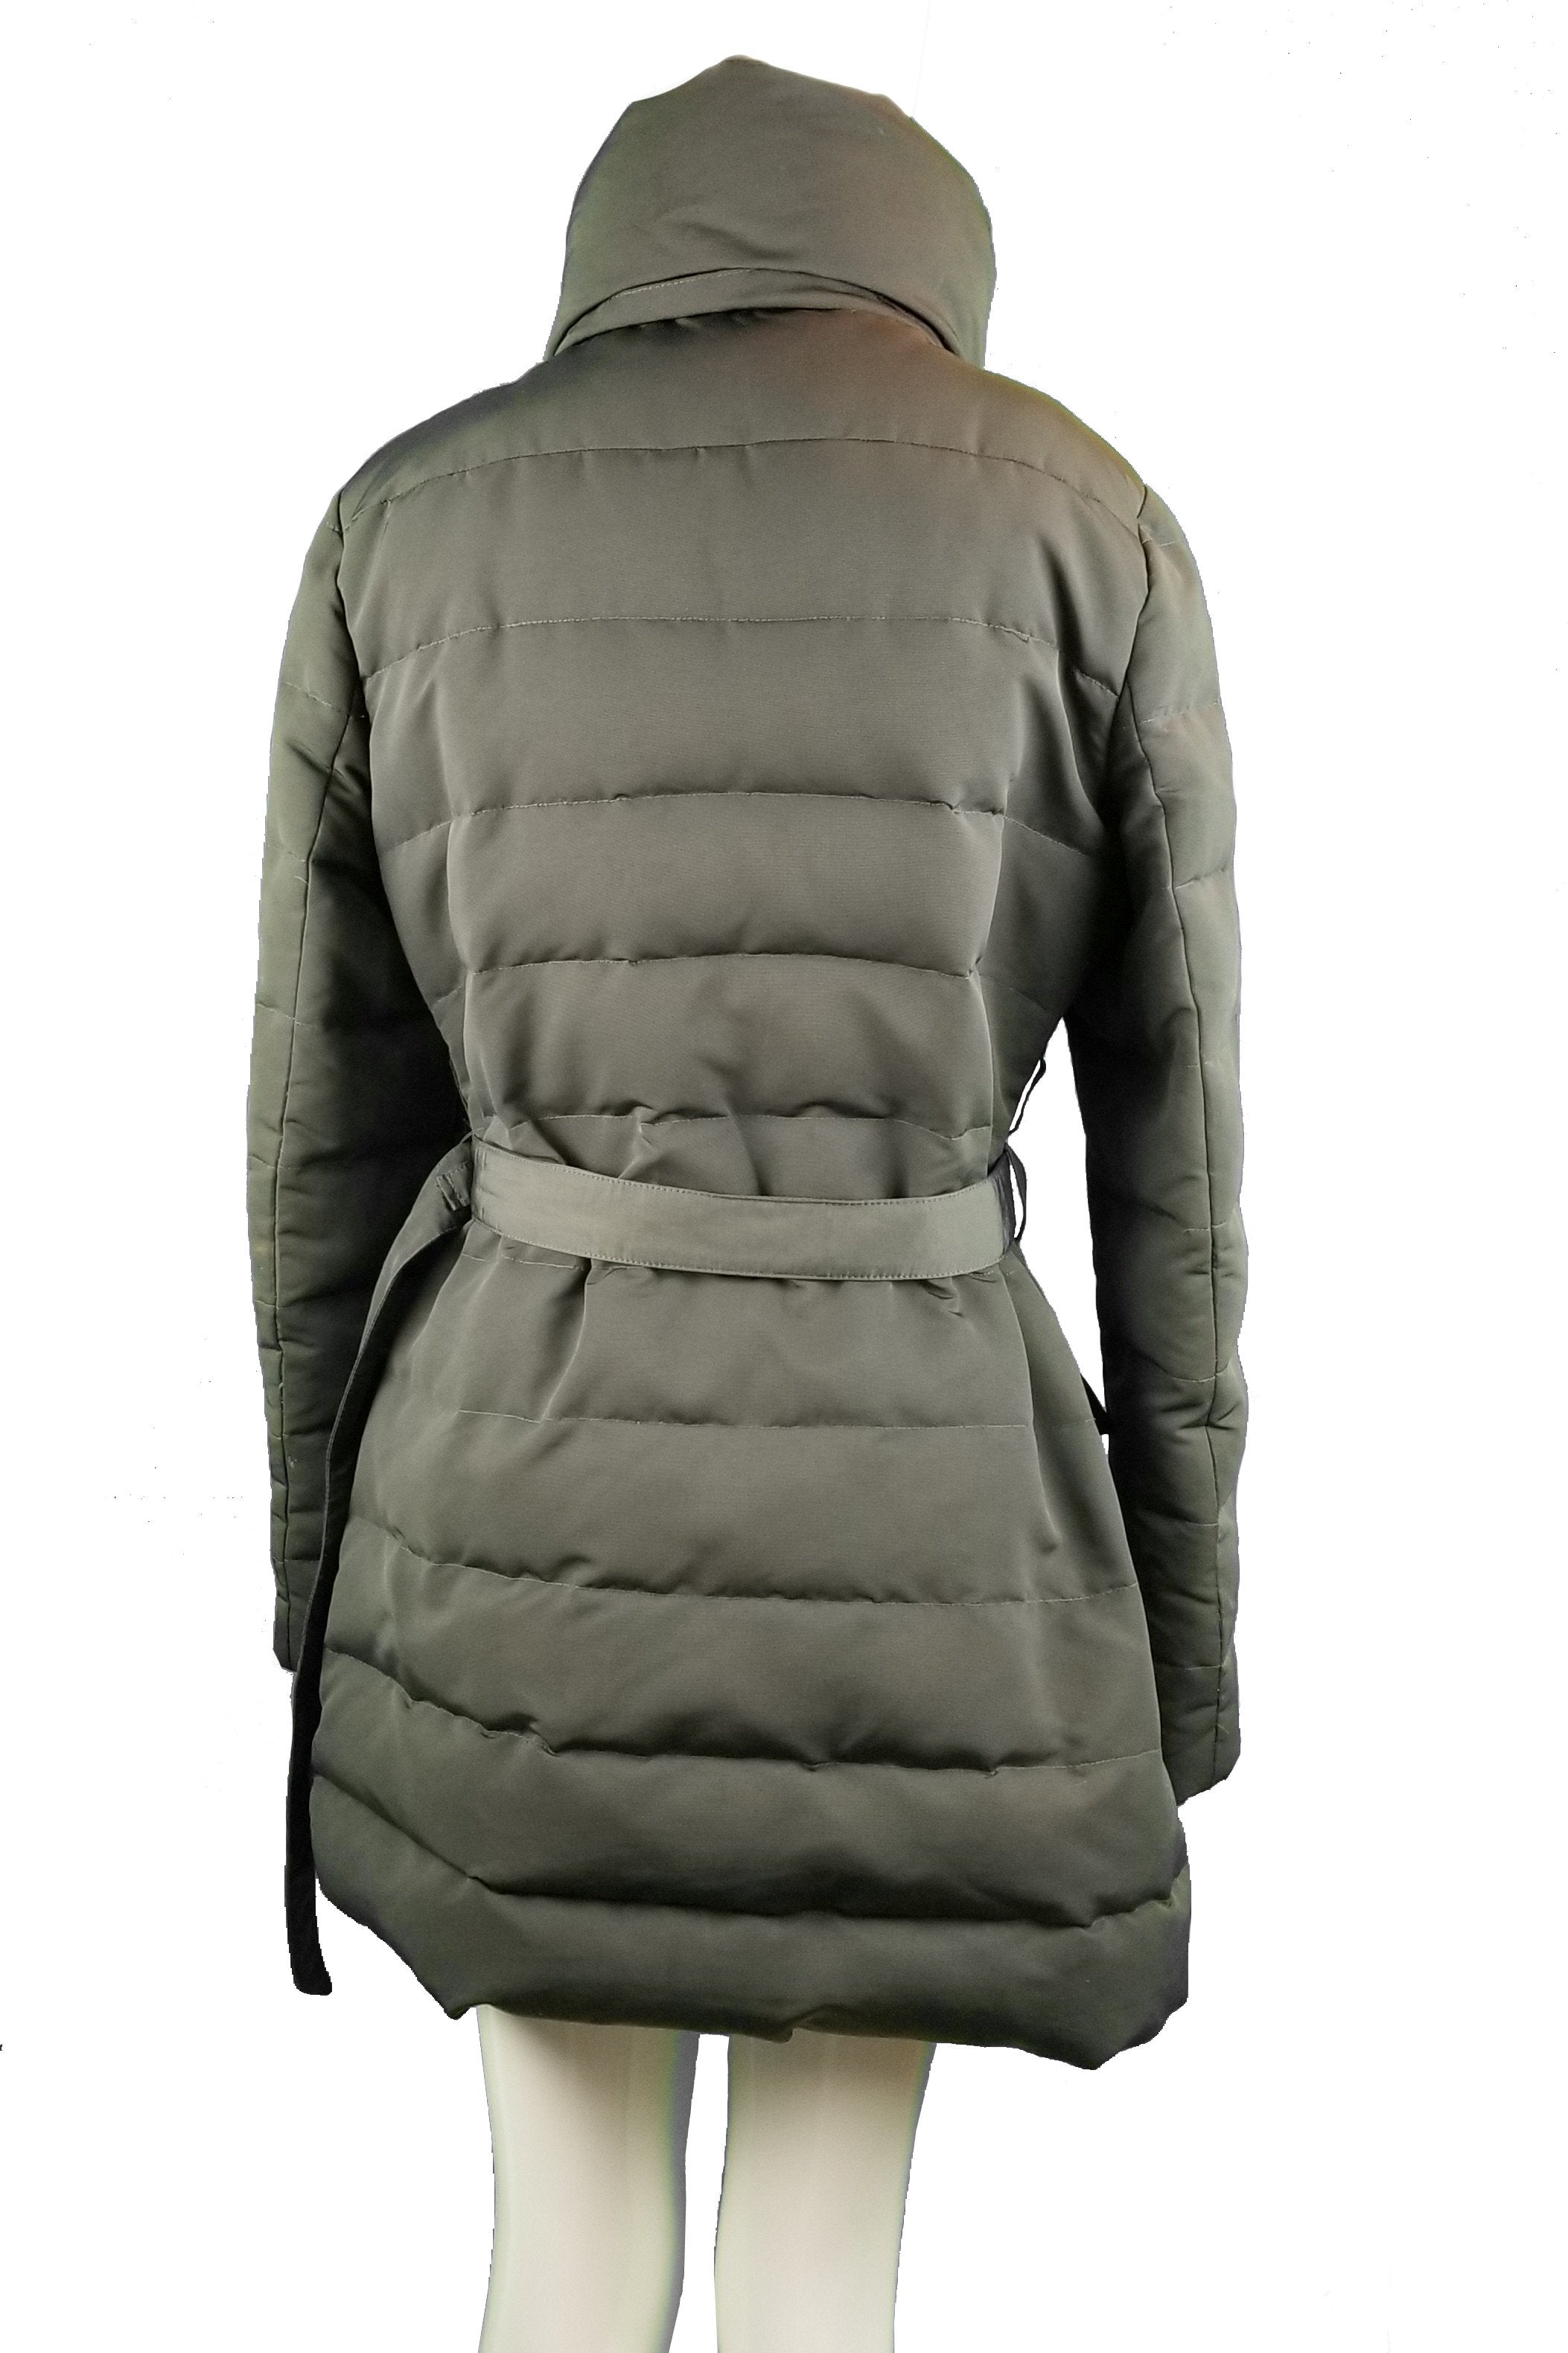 Escada Sport Down Jacket, Dressing warm doesn't have to be dull! This  winter jacket will keep you away from the cold and make you feel so stylish., Grey, Lining 100% Polyester; filling 70% Goose Down, 30% goose Quill, women's down jacket, women's winter jacket, down jacket, long jacket, warm winter jacket